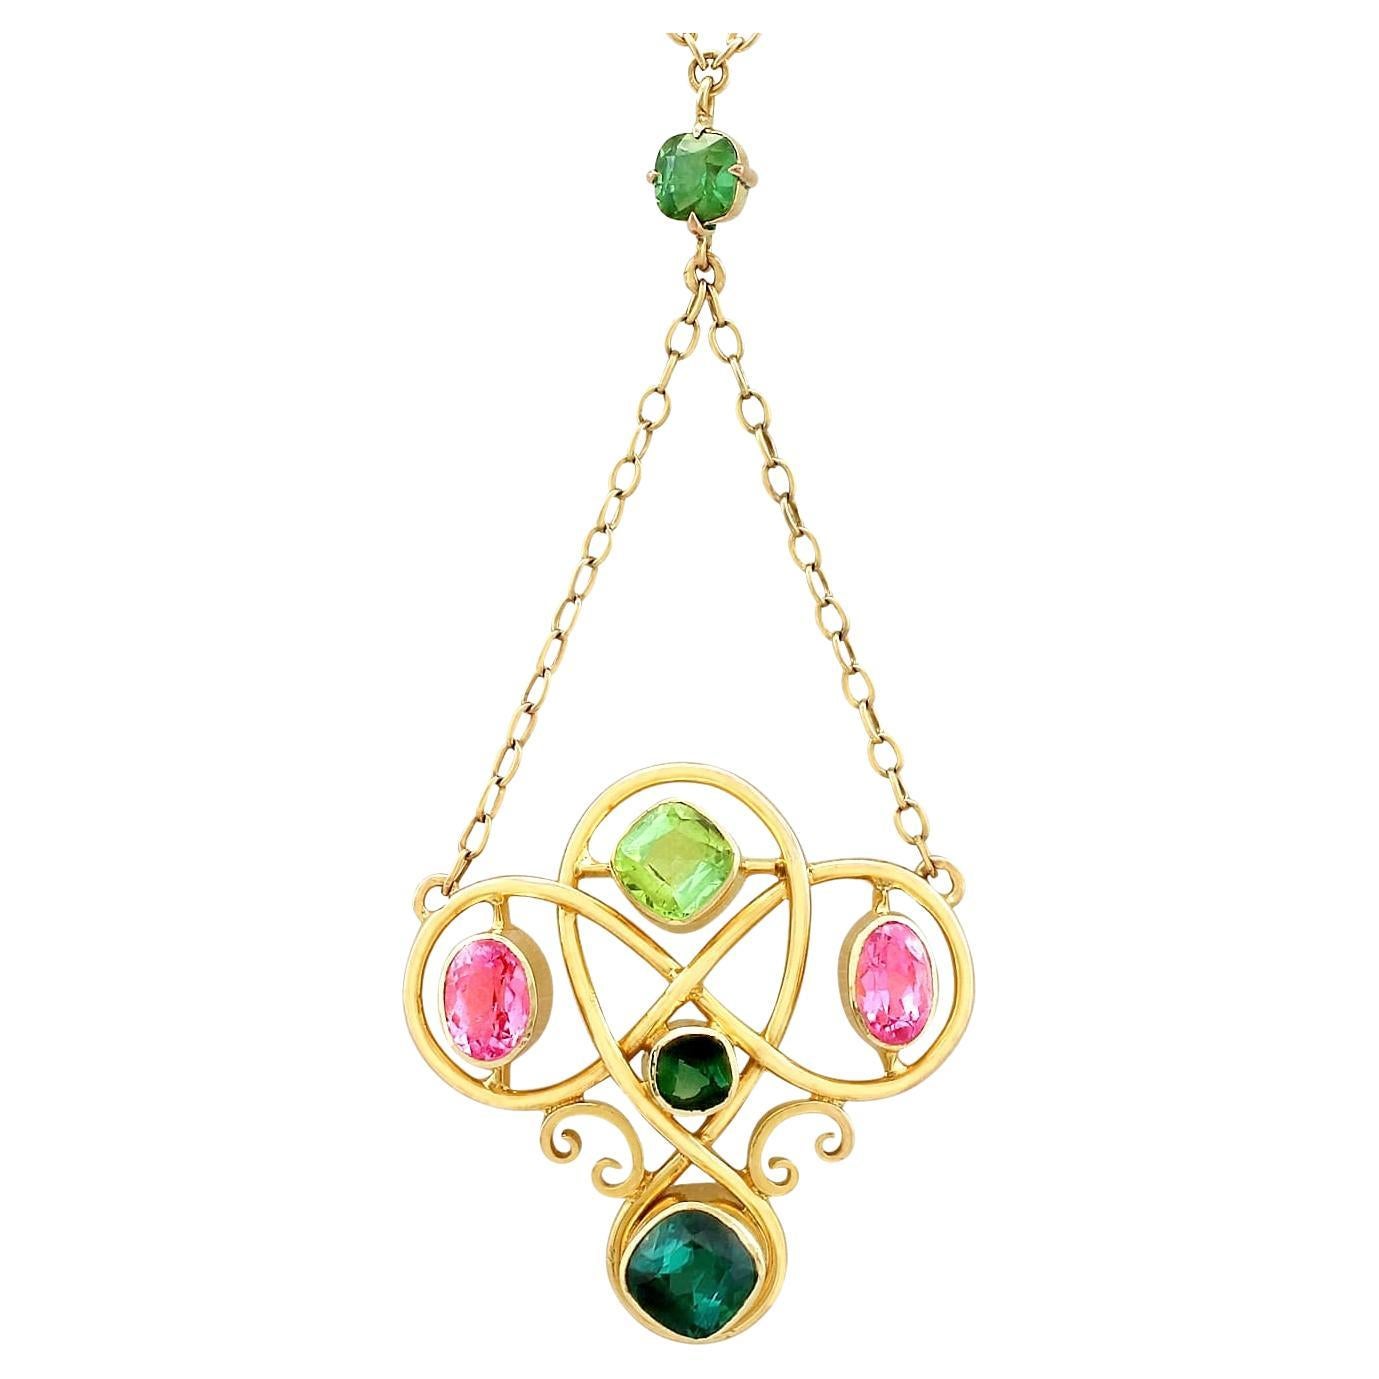 Antique Victorian 2.65 Carat Tourmaline and Peridot Yellow Gold Necklace For Sale